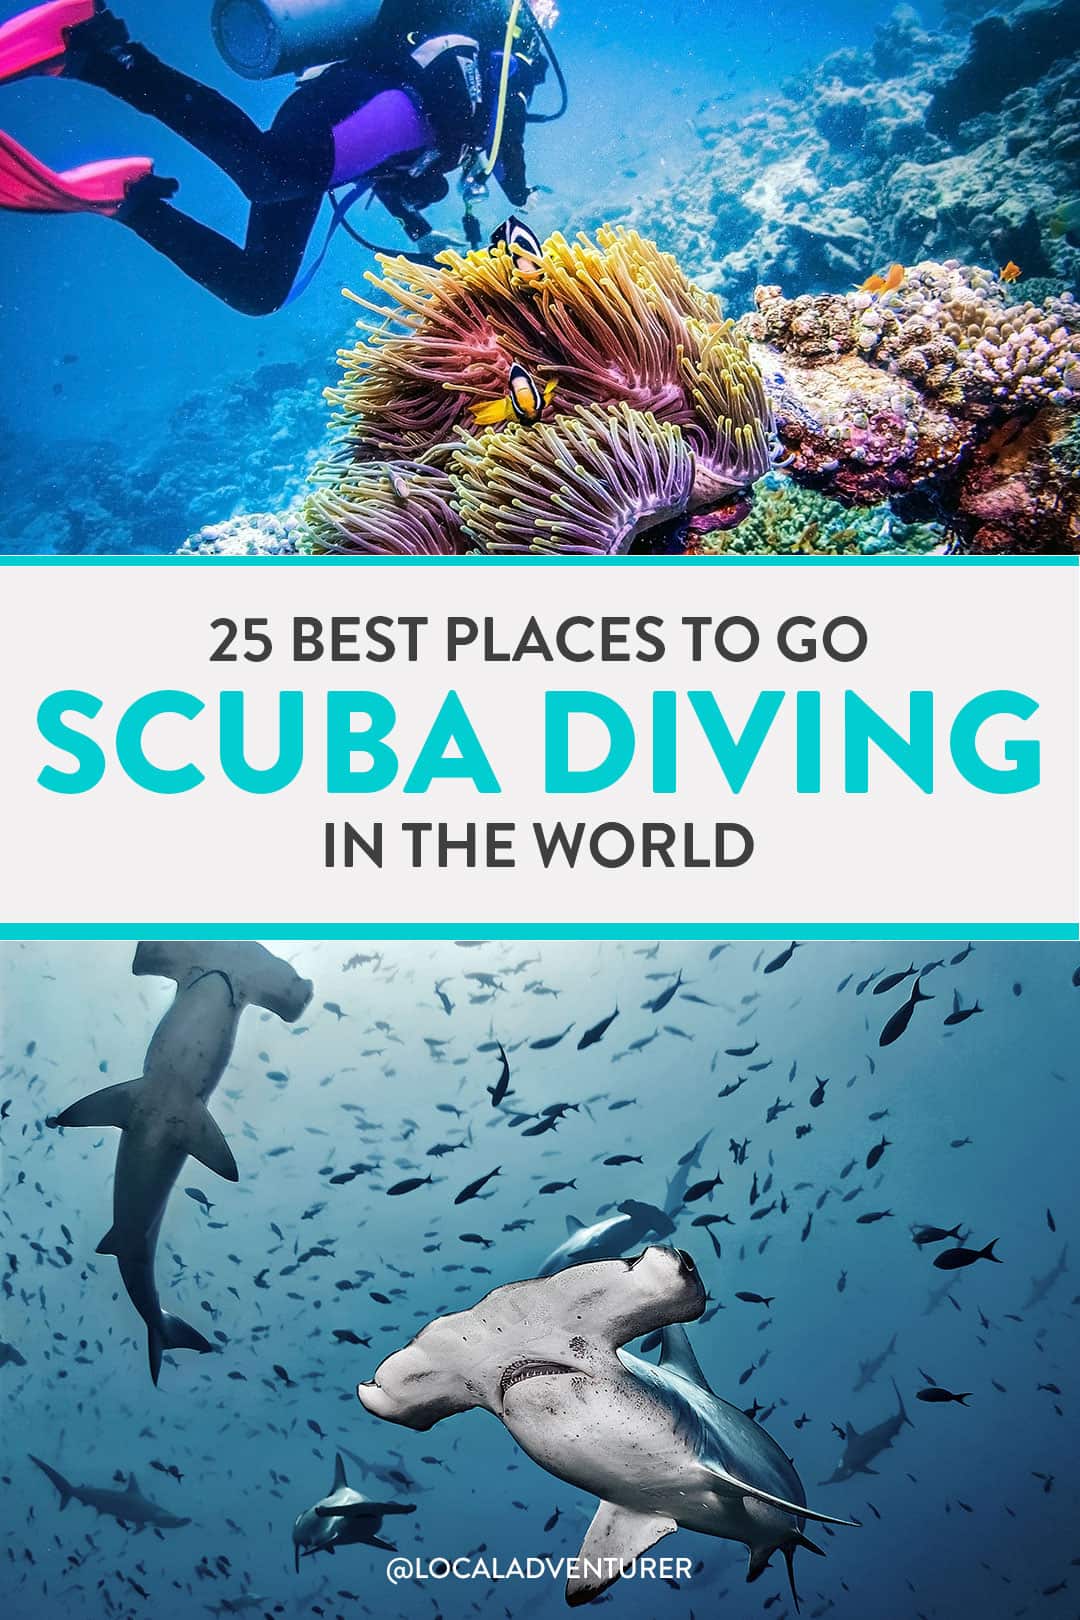 25 Best Sites in the World to Put on Your Bucket List